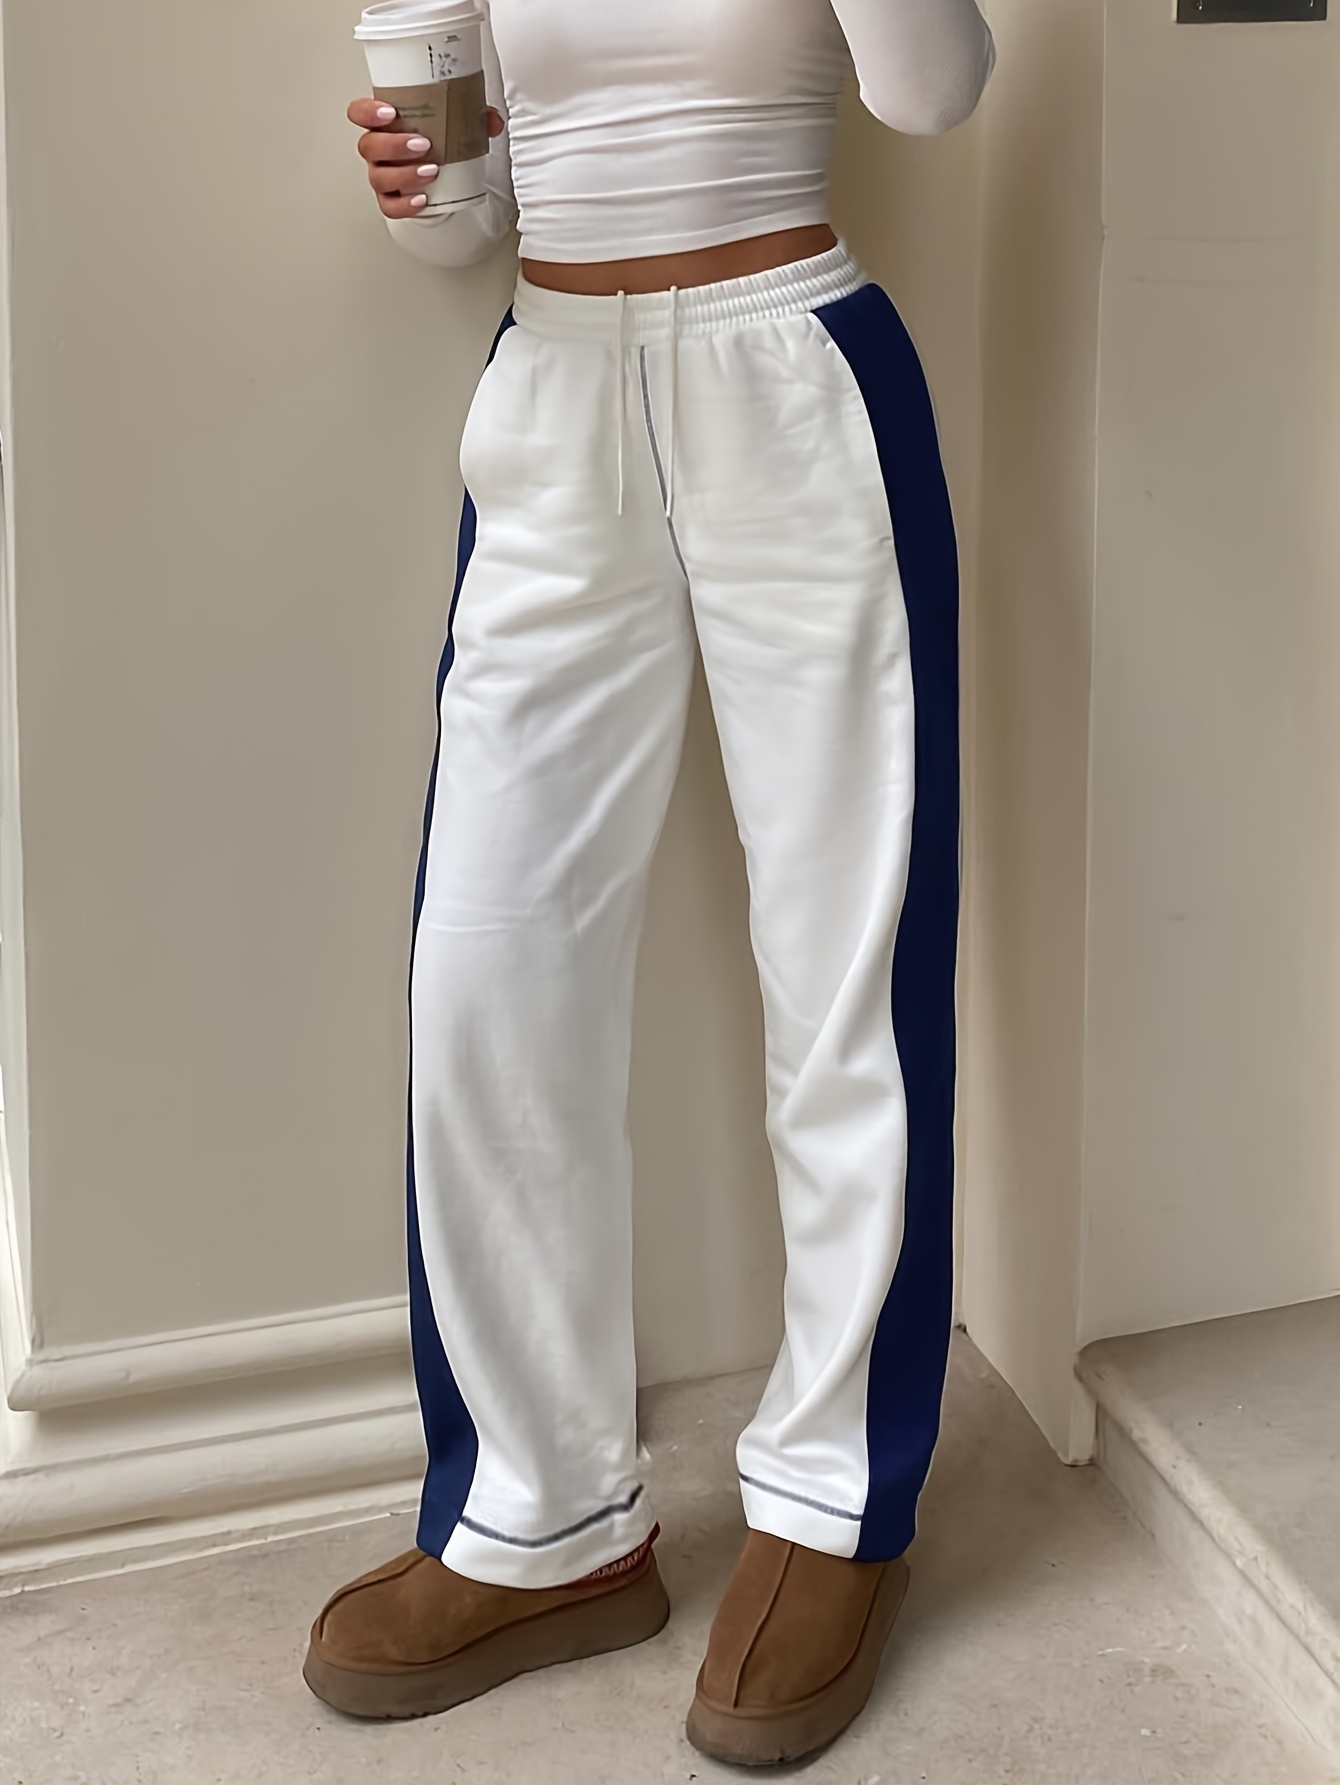 Blue And White Striped Dual Color Drawstring Pants, Versatile Comfy Loose  Straight Leg Sweatpants For Fall & Winter, Women's Clothing